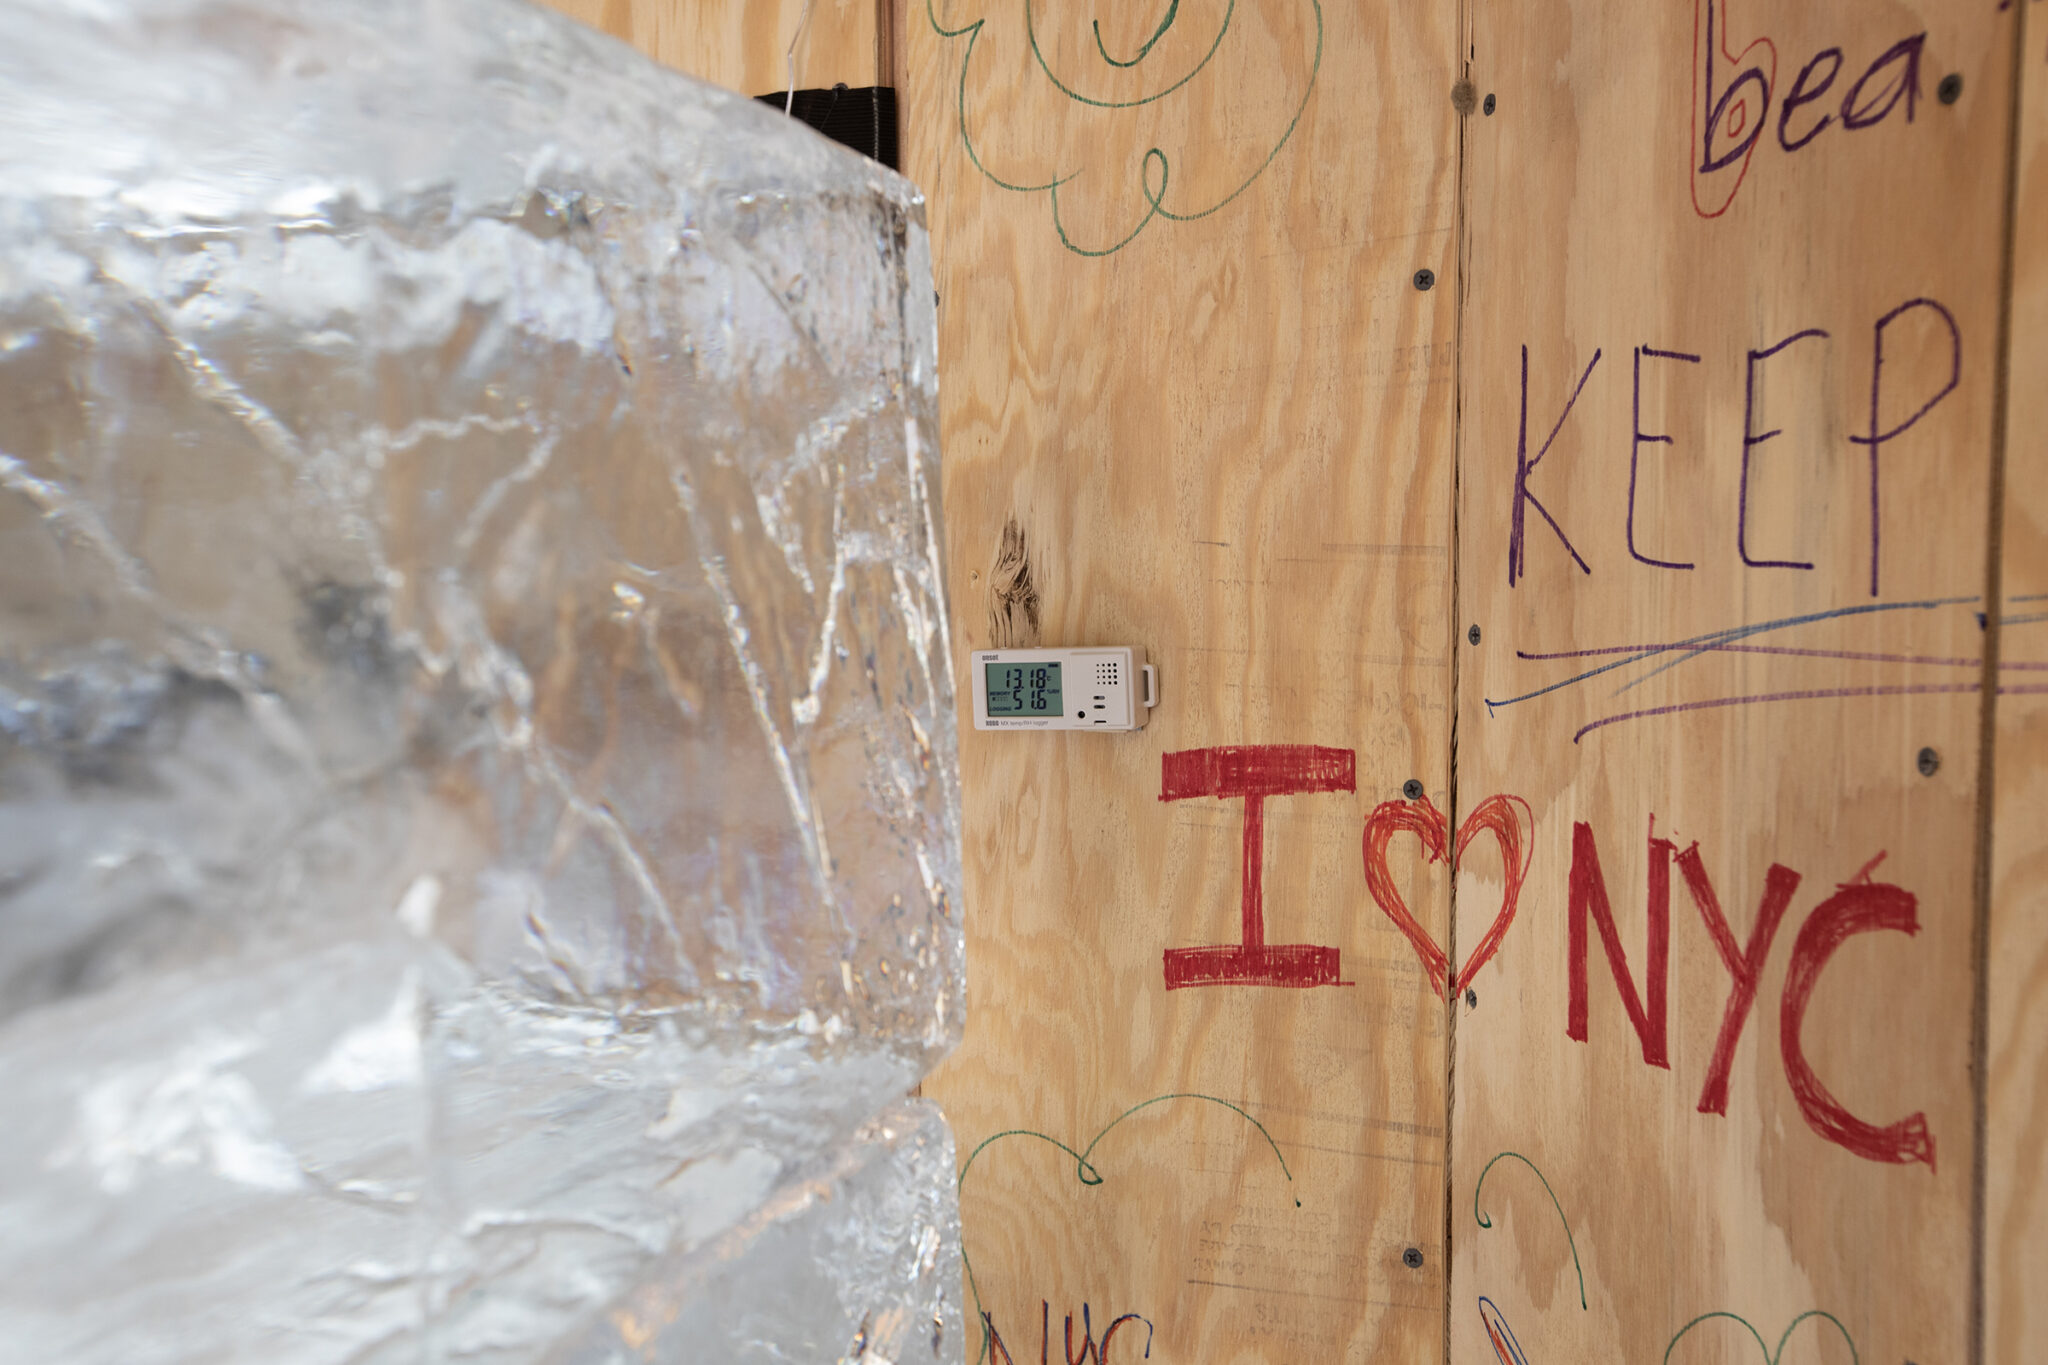 Large block of ice sits in front of wood structure wall with messages like I Heart NYC in marker